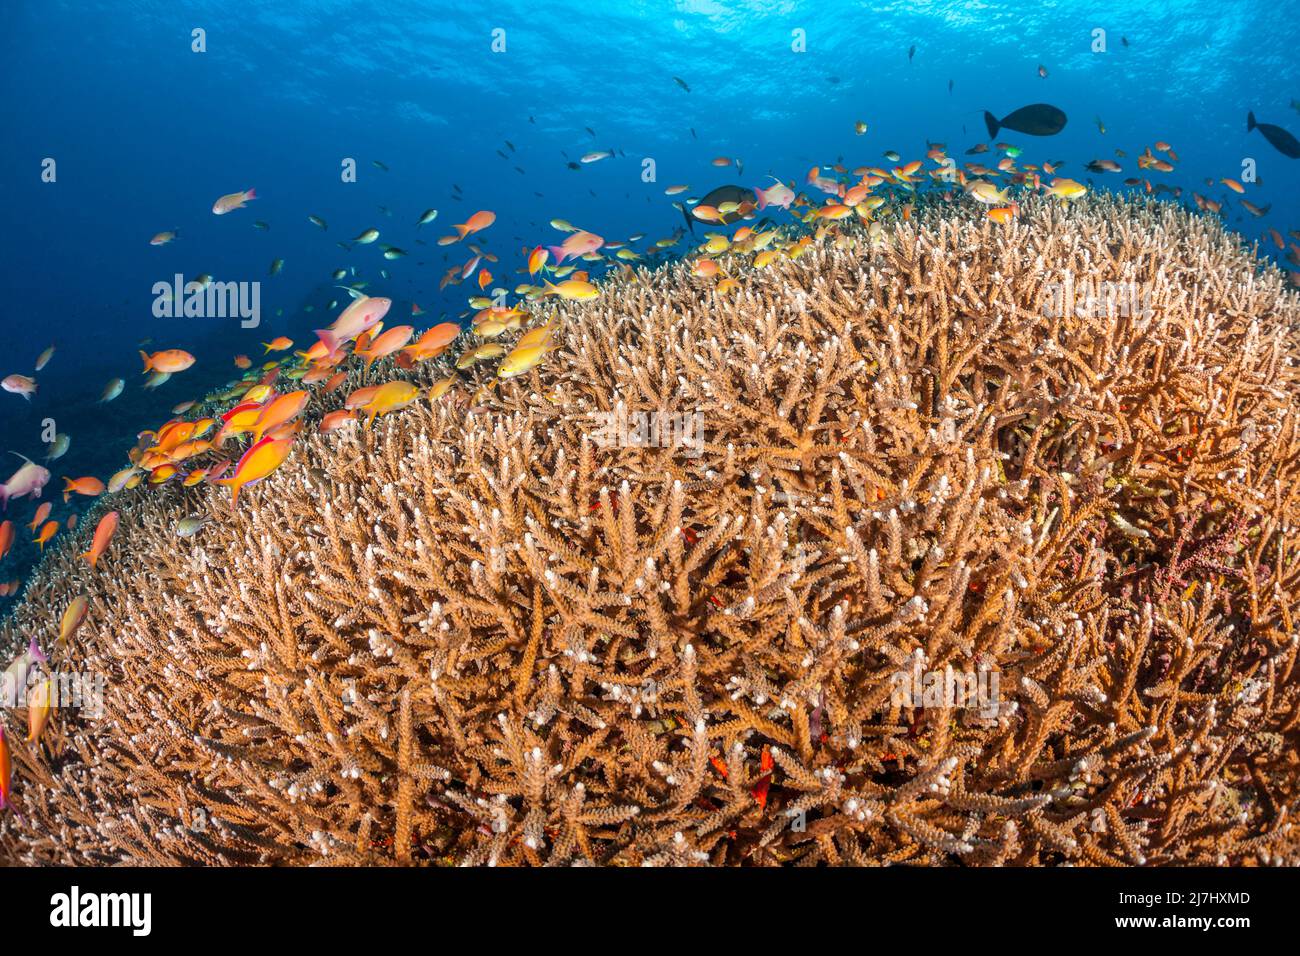 A enormous bed of delicate hard coral along with schooling anthias and various reef fish, dominate this underwater scene, Crystal Bay, Nusa Penida, Ba Stock Photo